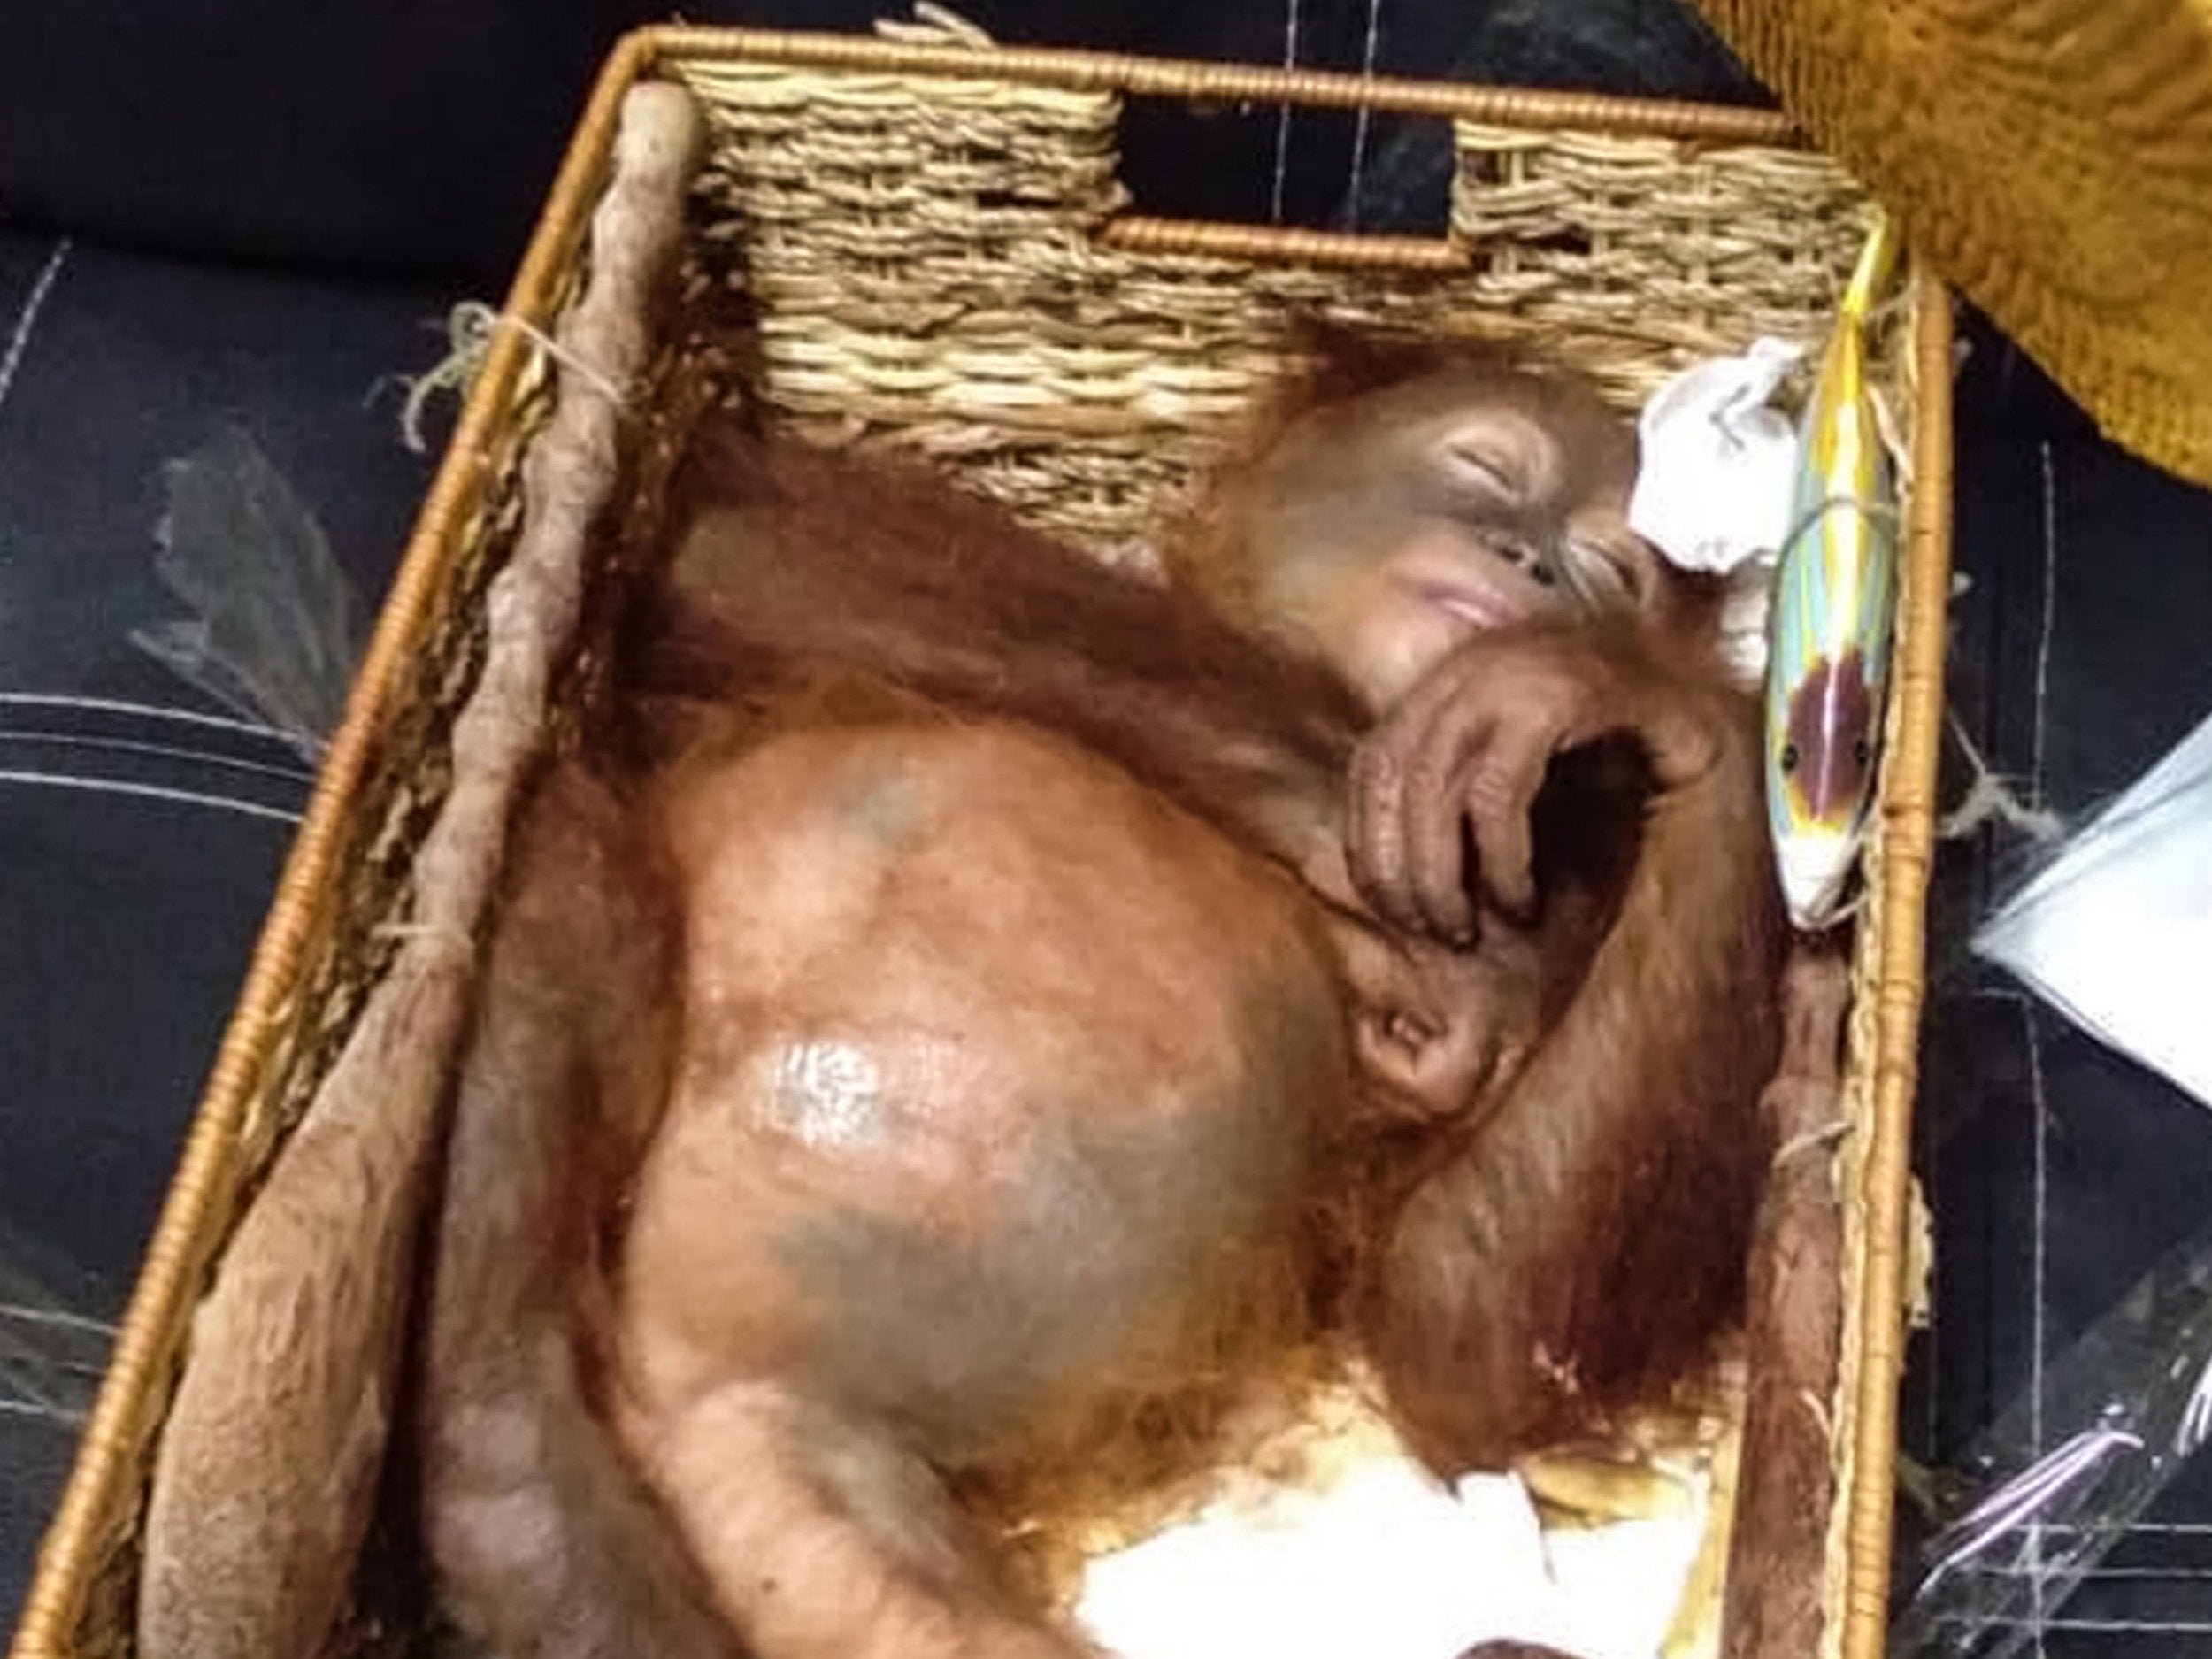 A rescued two-year-old orangutan resting inside a rattan basket, after a smuggling attempt by a Russian tourist at Bali’s international airport